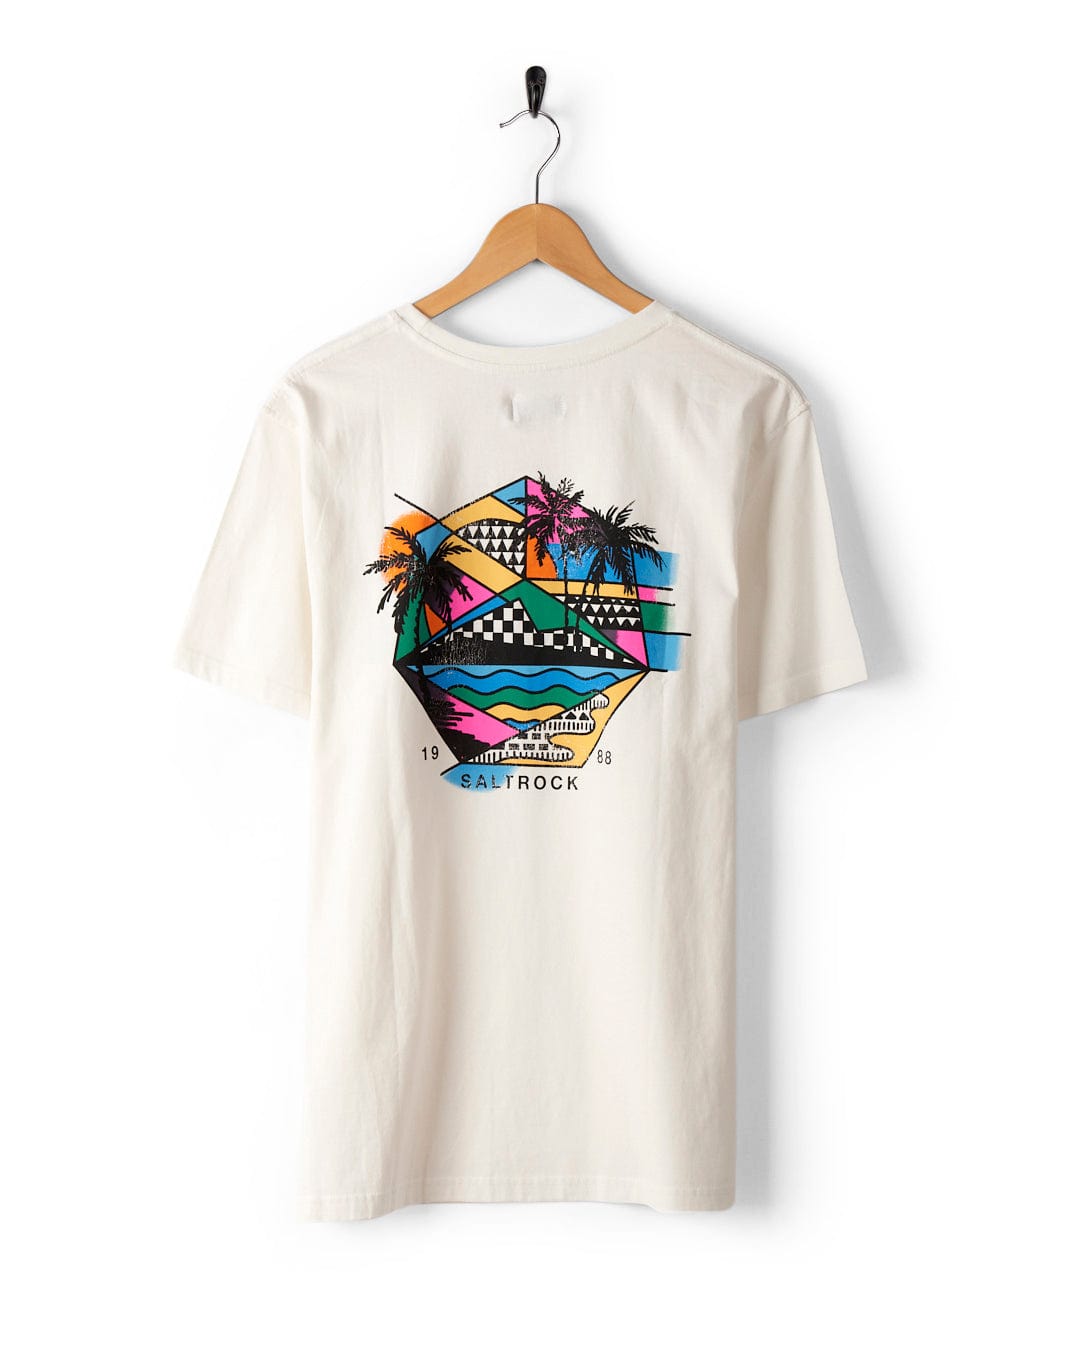 Geo Palms - Mens T-Shirt - White on a hanger with vibrant Saltrock graphics showcasing palm trees, mountains, waves, and the text 